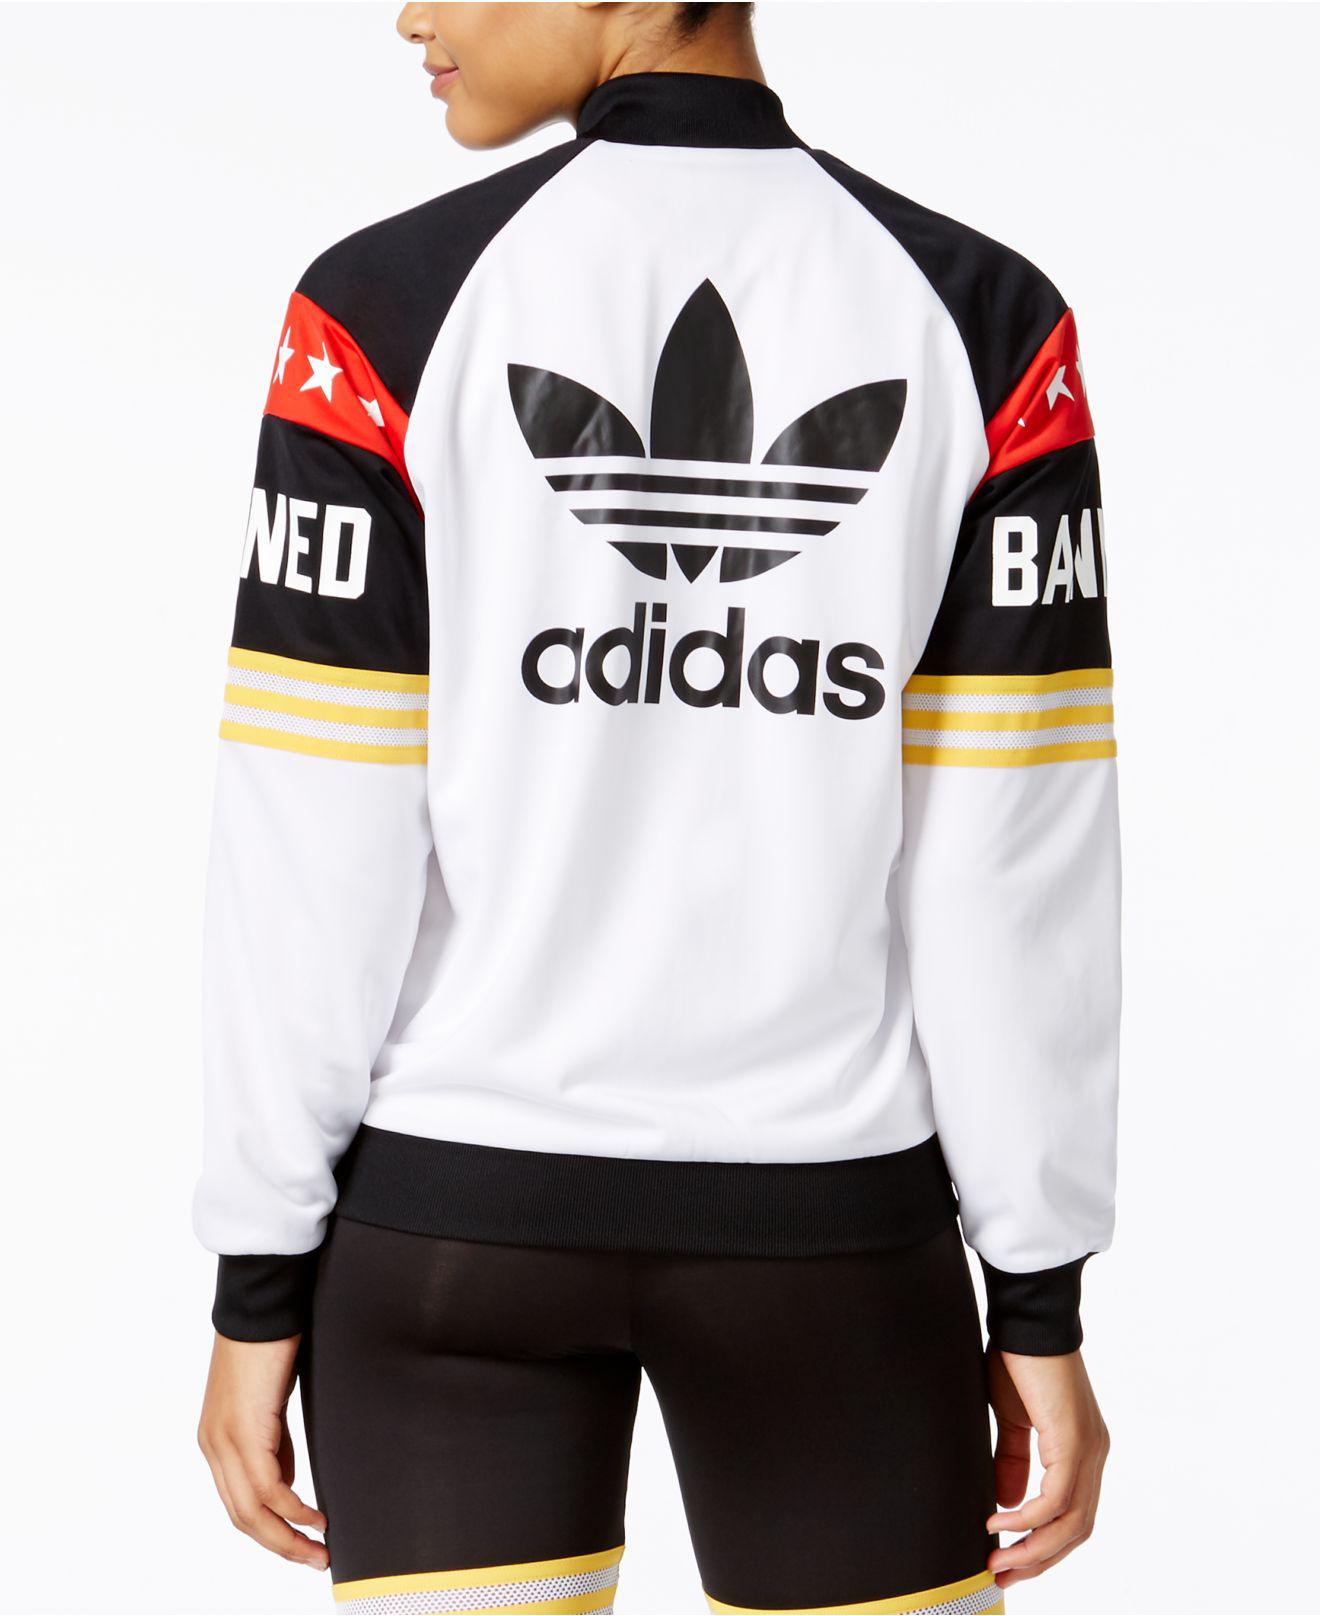 adidas banned from normal jacket